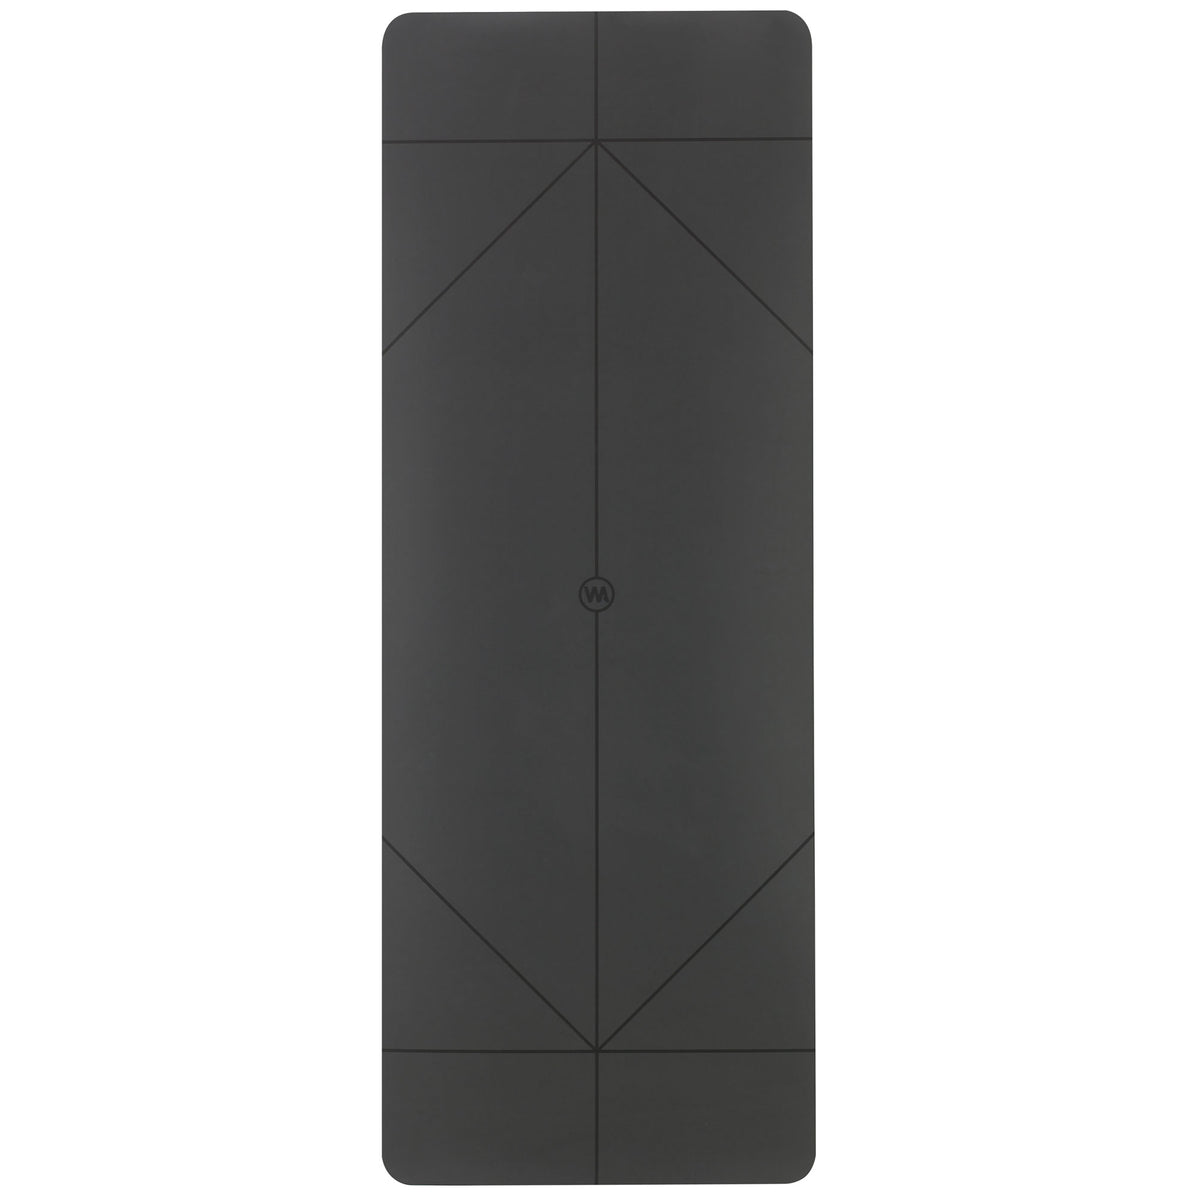 black mens yoga mat by warrior addict with alignment lines